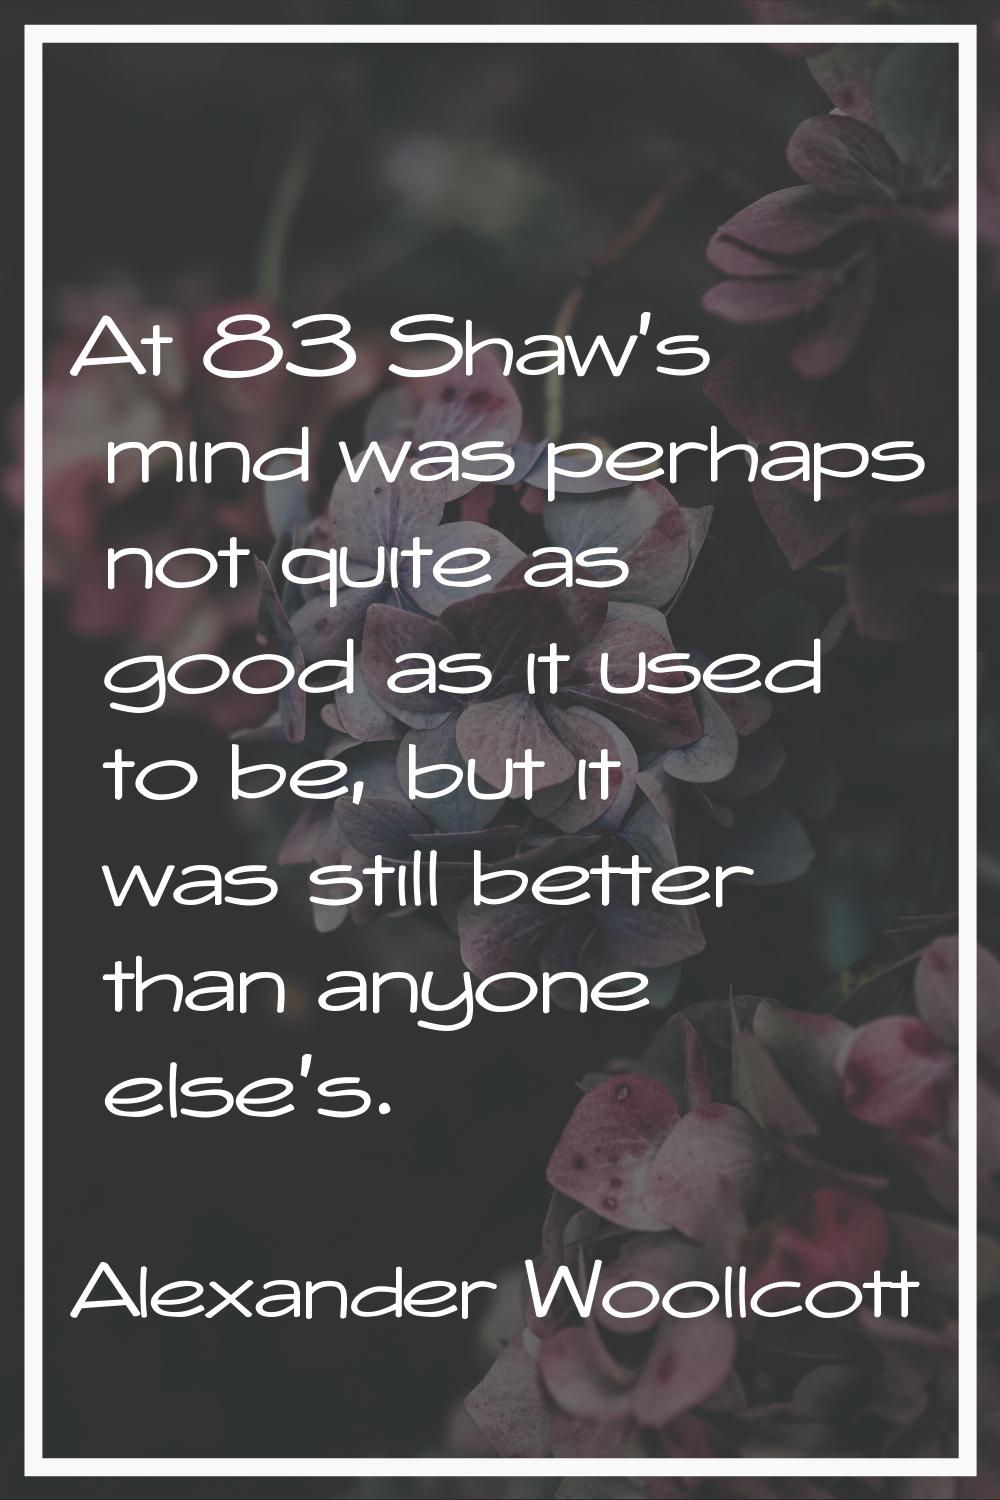 At 83 Shaw's mind was perhaps not quite as good as it used to be, but it was still better than anyo